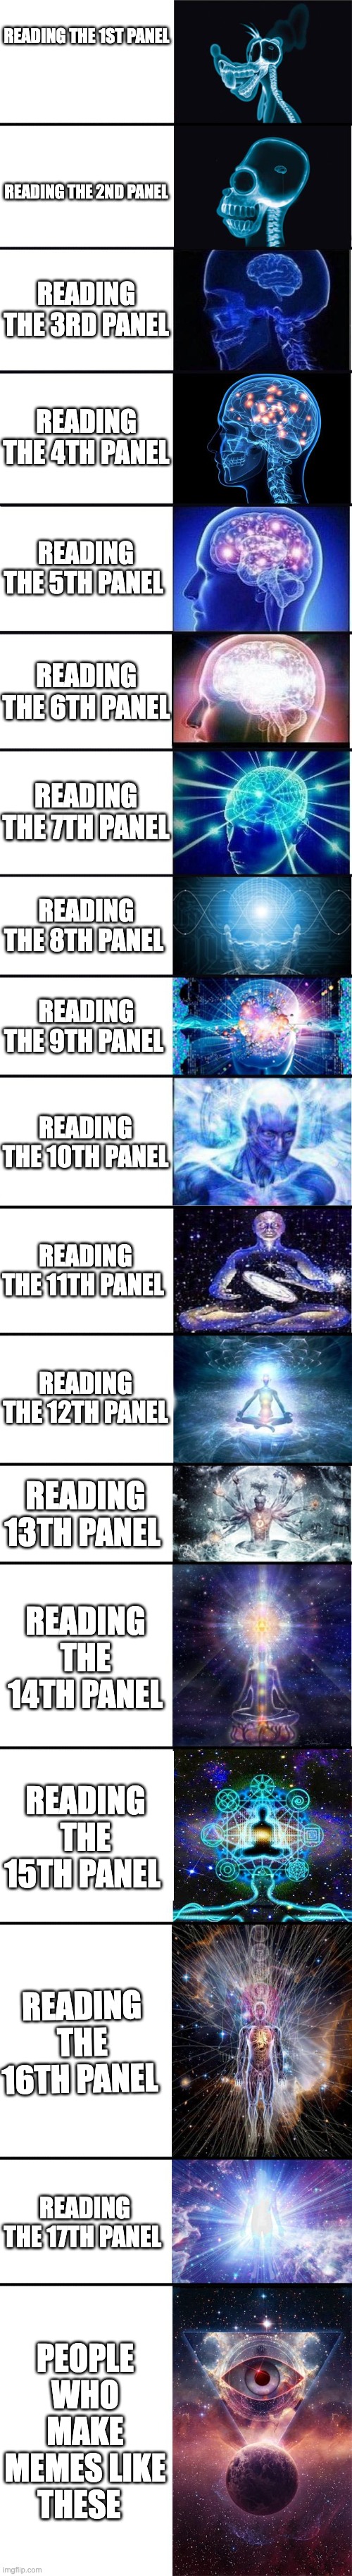 expanding brain: 9001 | READING THE 1ST PANEL; READING THE 2ND PANEL; READING THE 3RD PANEL; READING THE 4TH PANEL; READING THE 5TH PANEL; READING THE 6TH PANEL; READING THE 7TH PANEL; READING THE 8TH PANEL; READING THE 9TH PANEL; READING THE 10TH PANEL; READING THE 11TH PANEL; READING THE 12TH PANEL; READING 13TH PANEL; READING THE 14TH PANEL; READING THE 15TH PANEL; READING THE 16TH PANEL; READING THE 17TH PANEL; PEOPLE WHO MAKE MEMES LIKE THESE | image tagged in expanding brain 9001 | made w/ Imgflip meme maker